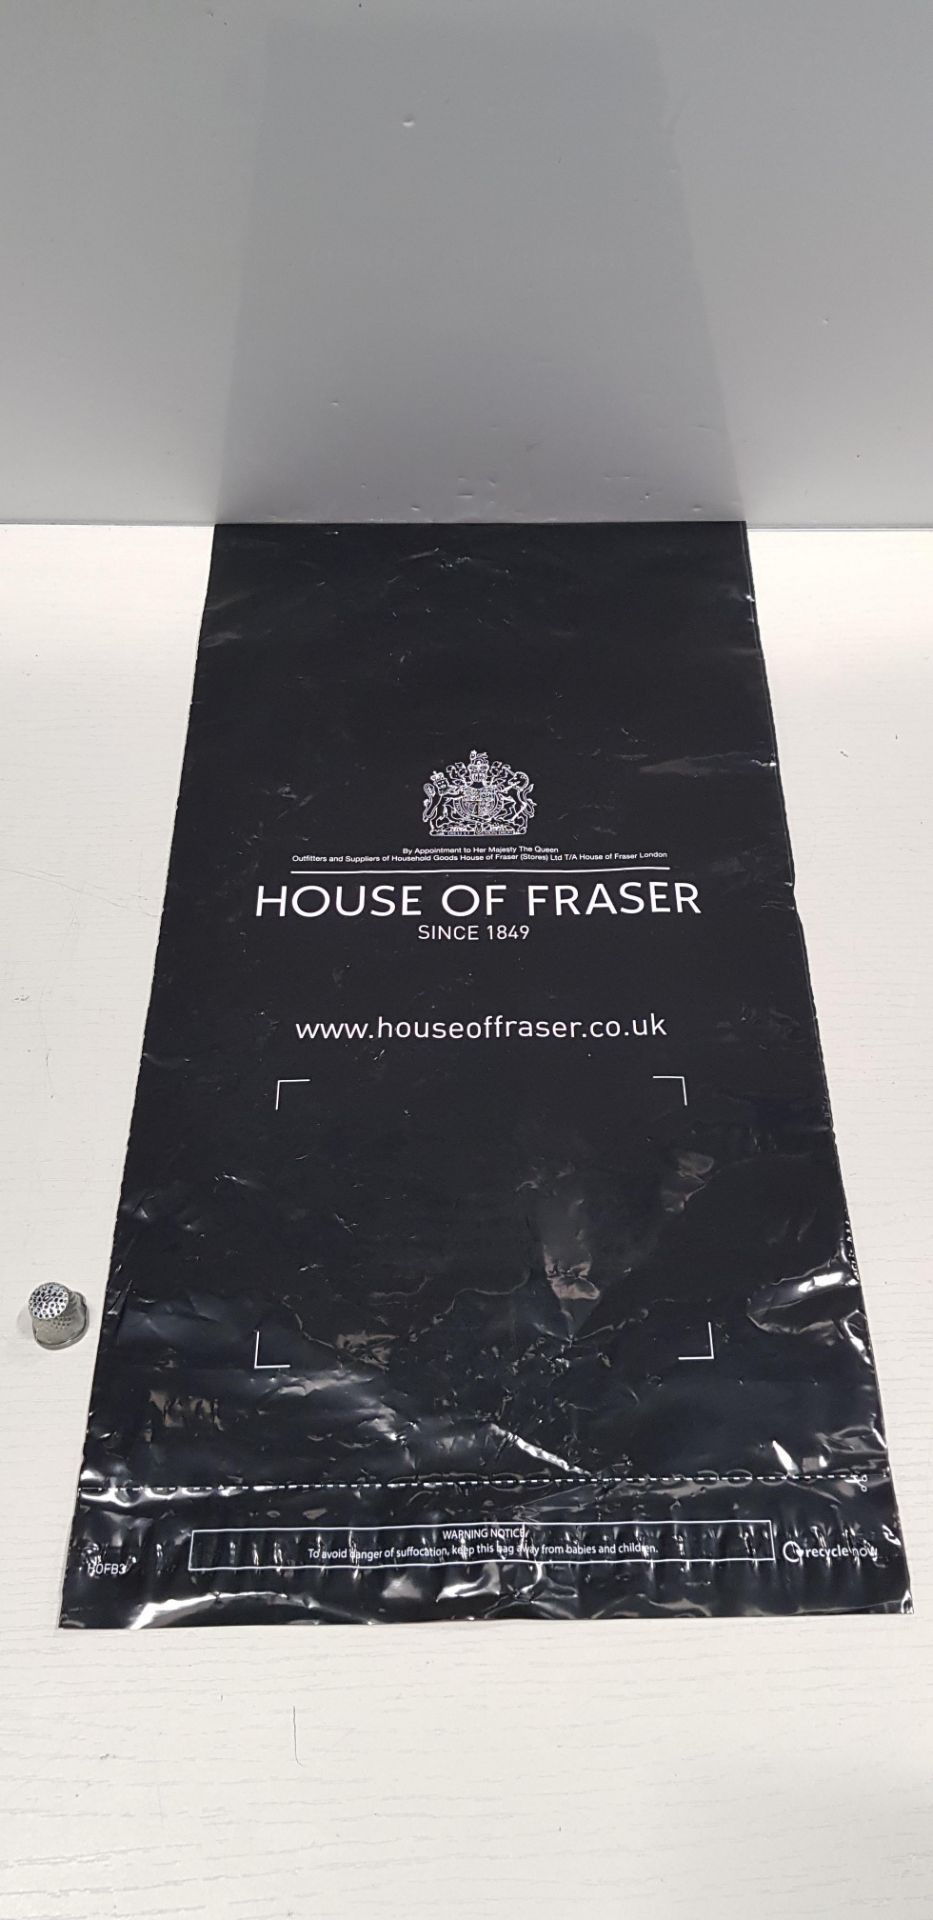 9000 X BRAND NEW HOUSE OF FRASER SELF SEAL BAGS IN 9 BOXES - 45 CM X 24 CM